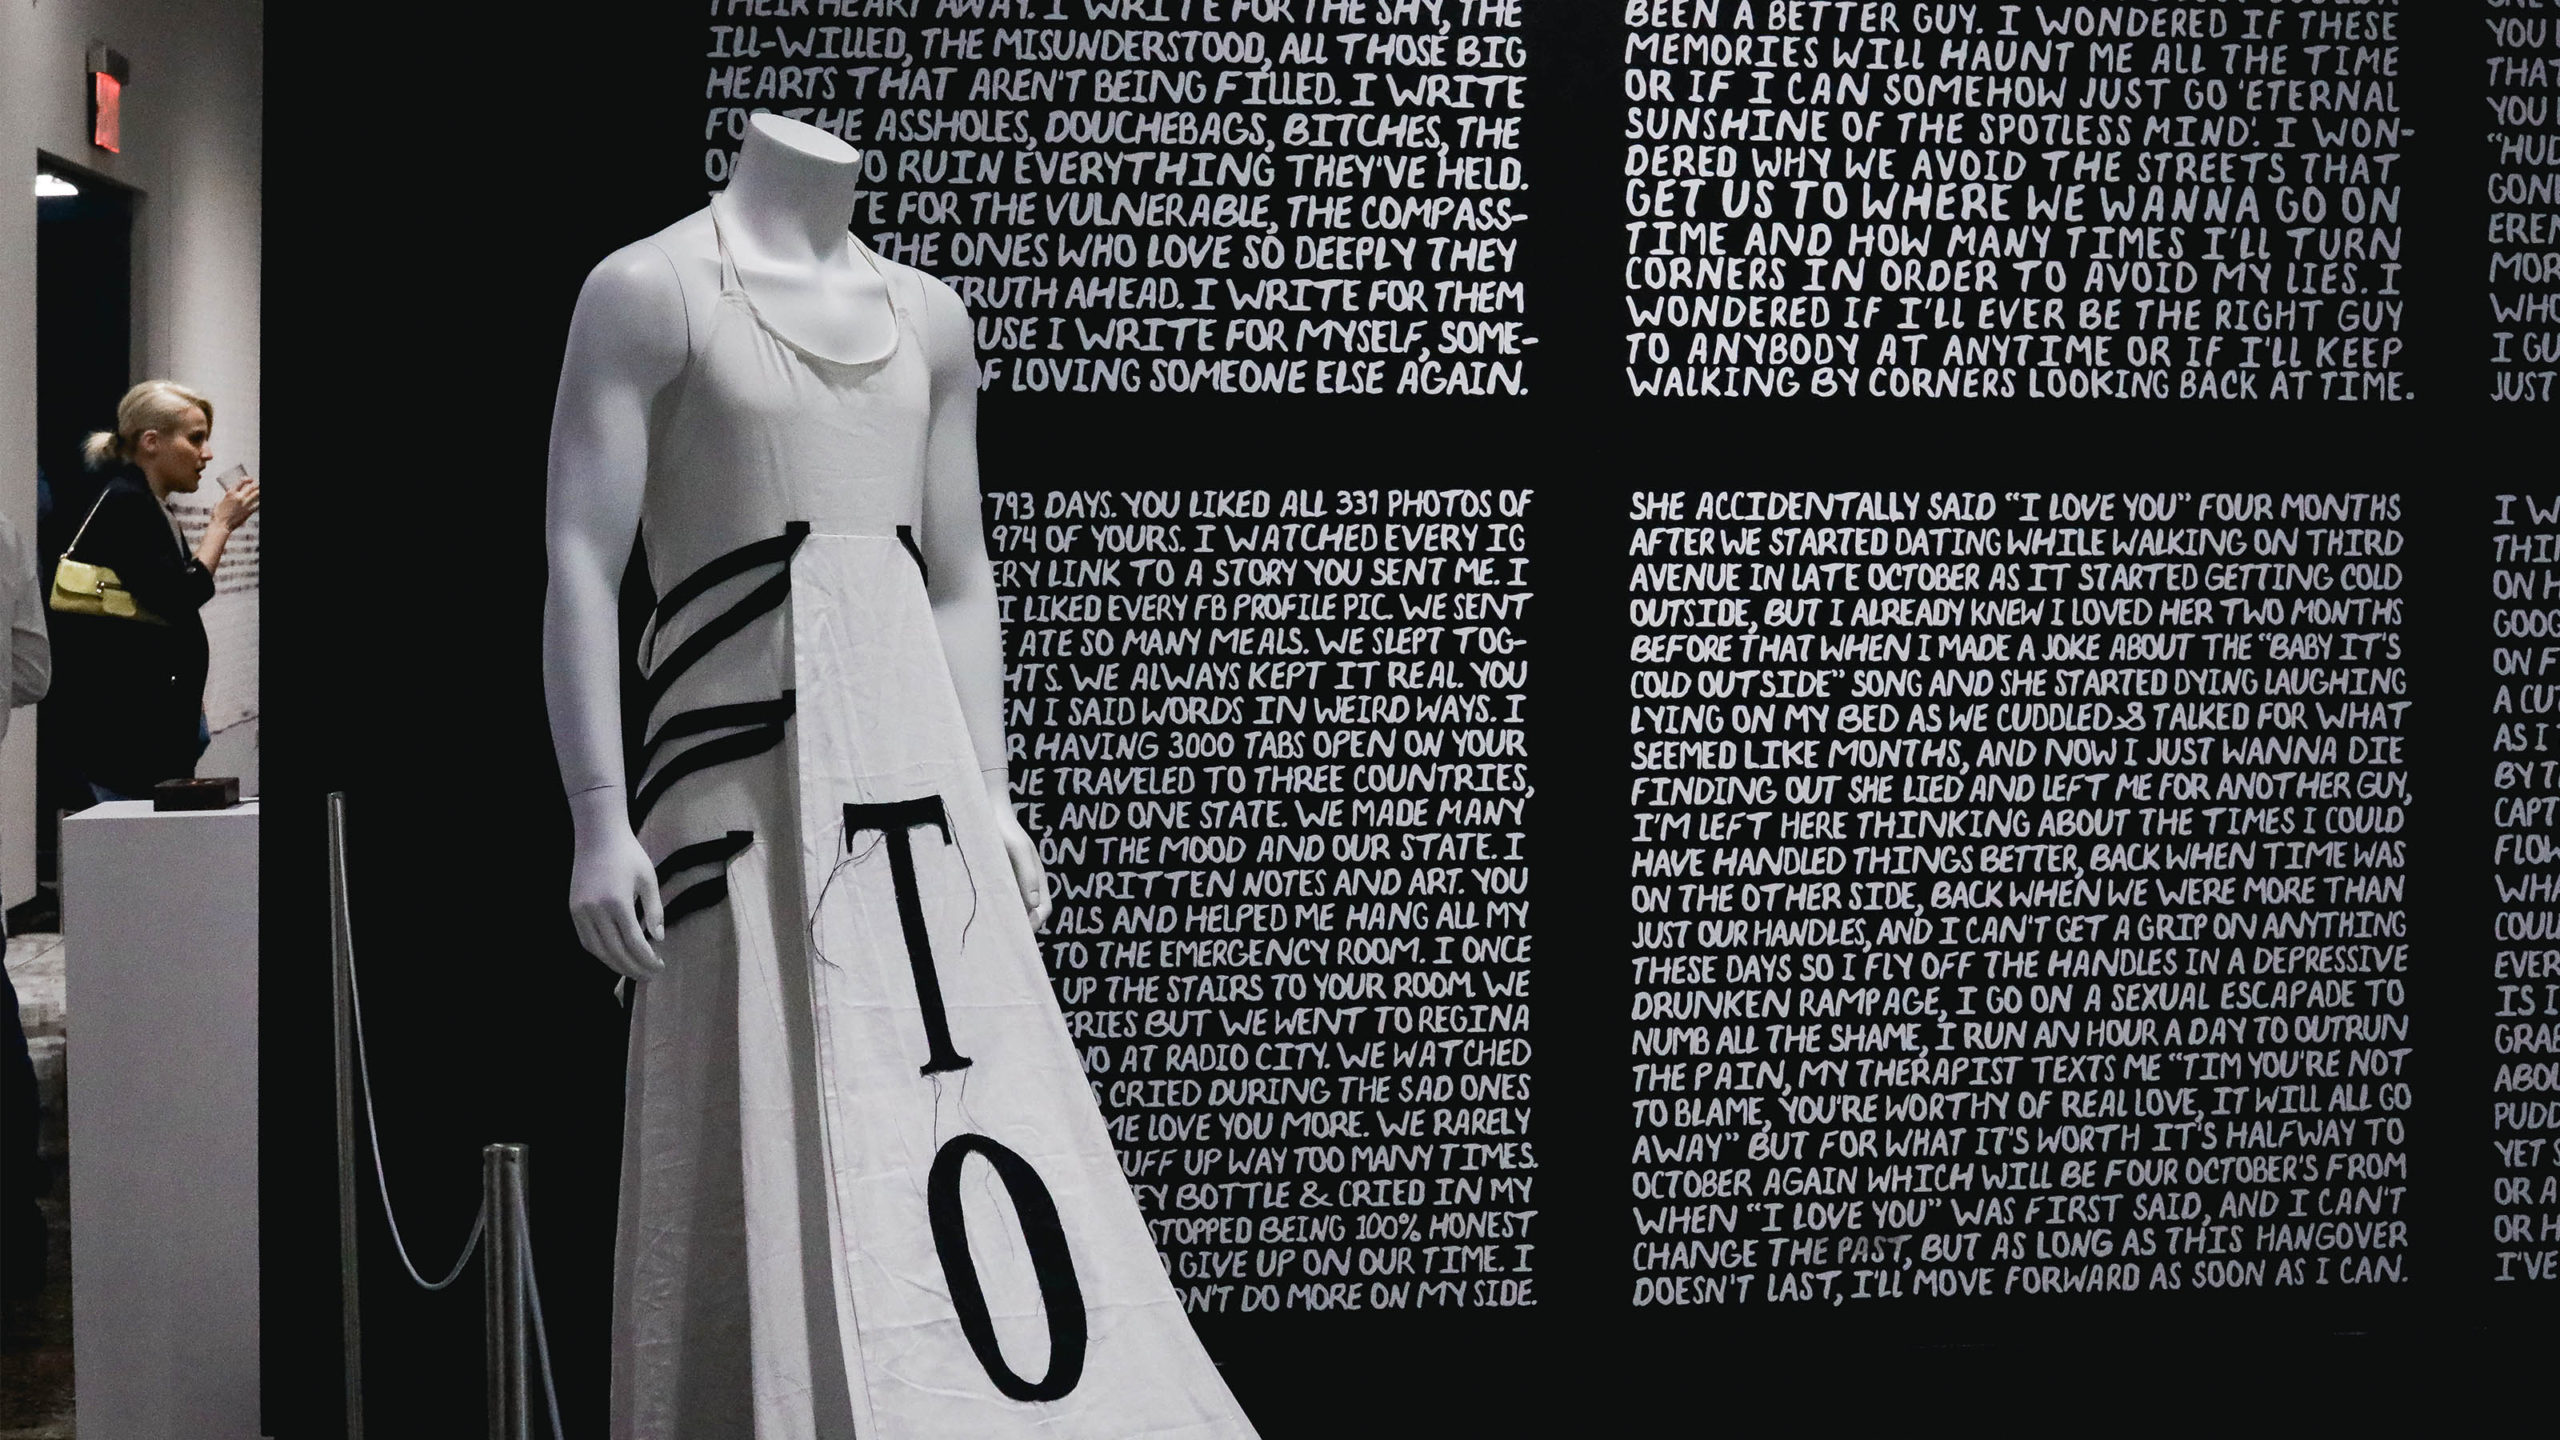 Type and Clothing- Black on White with Timothy Goodman's Text in background